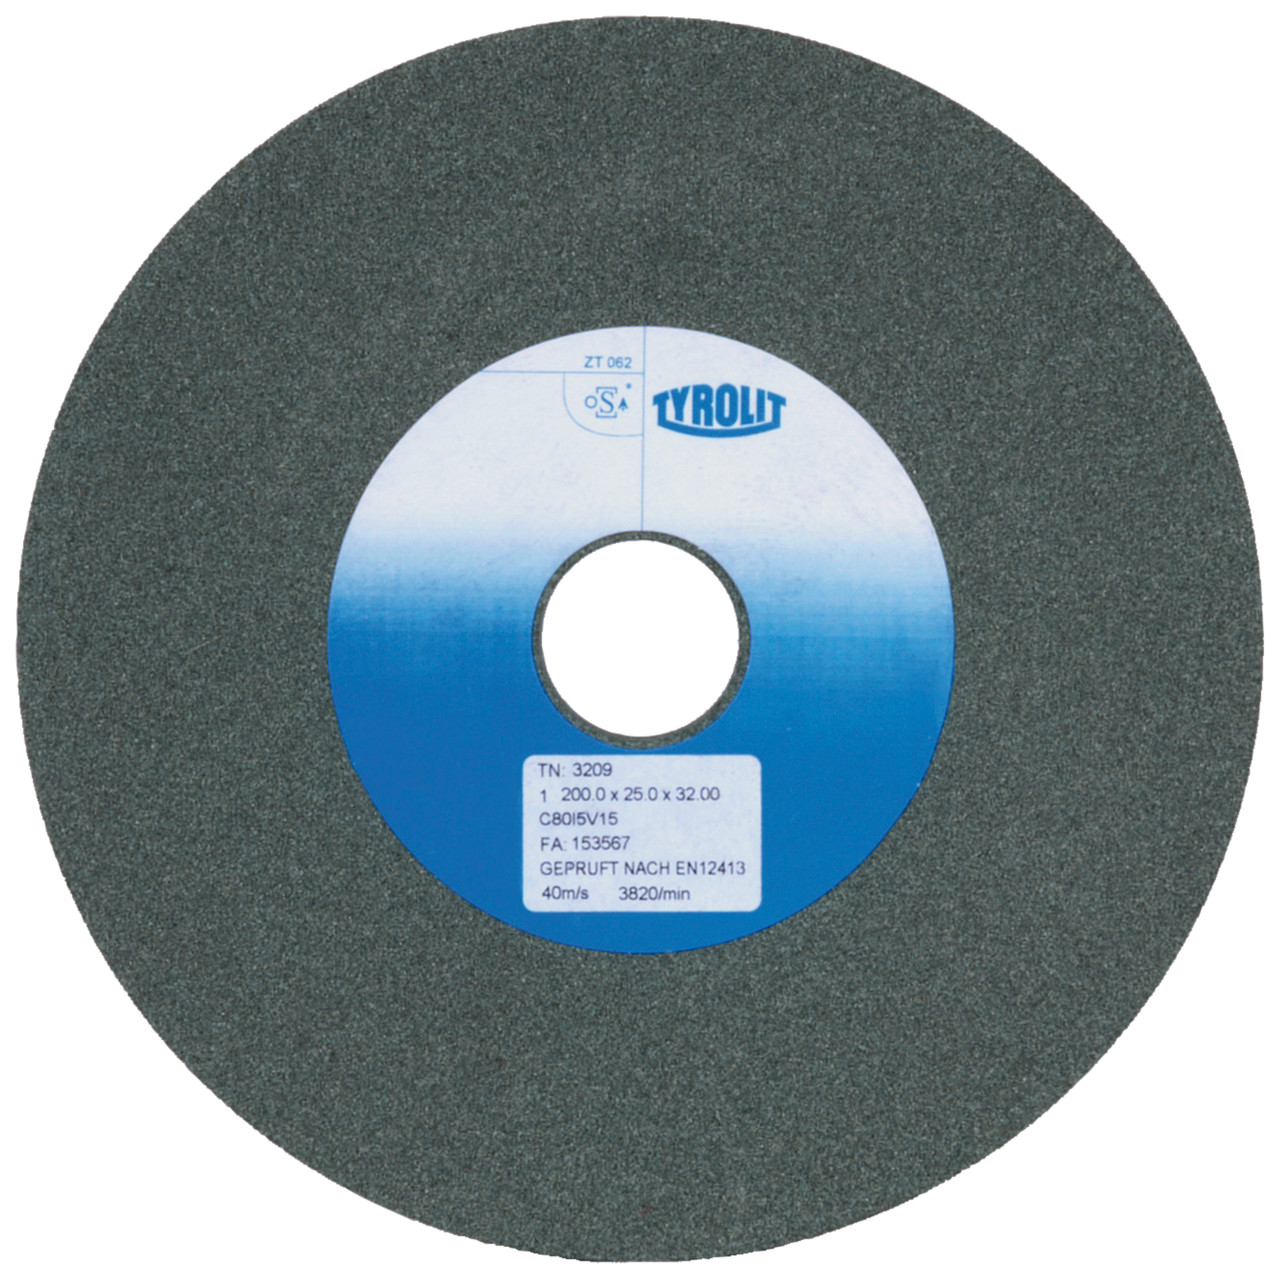 Tyrolit Conventional ceramic grinding discs DxDxH 150x20x32 For carbide and cast iron, shape: 1, Art. 123633